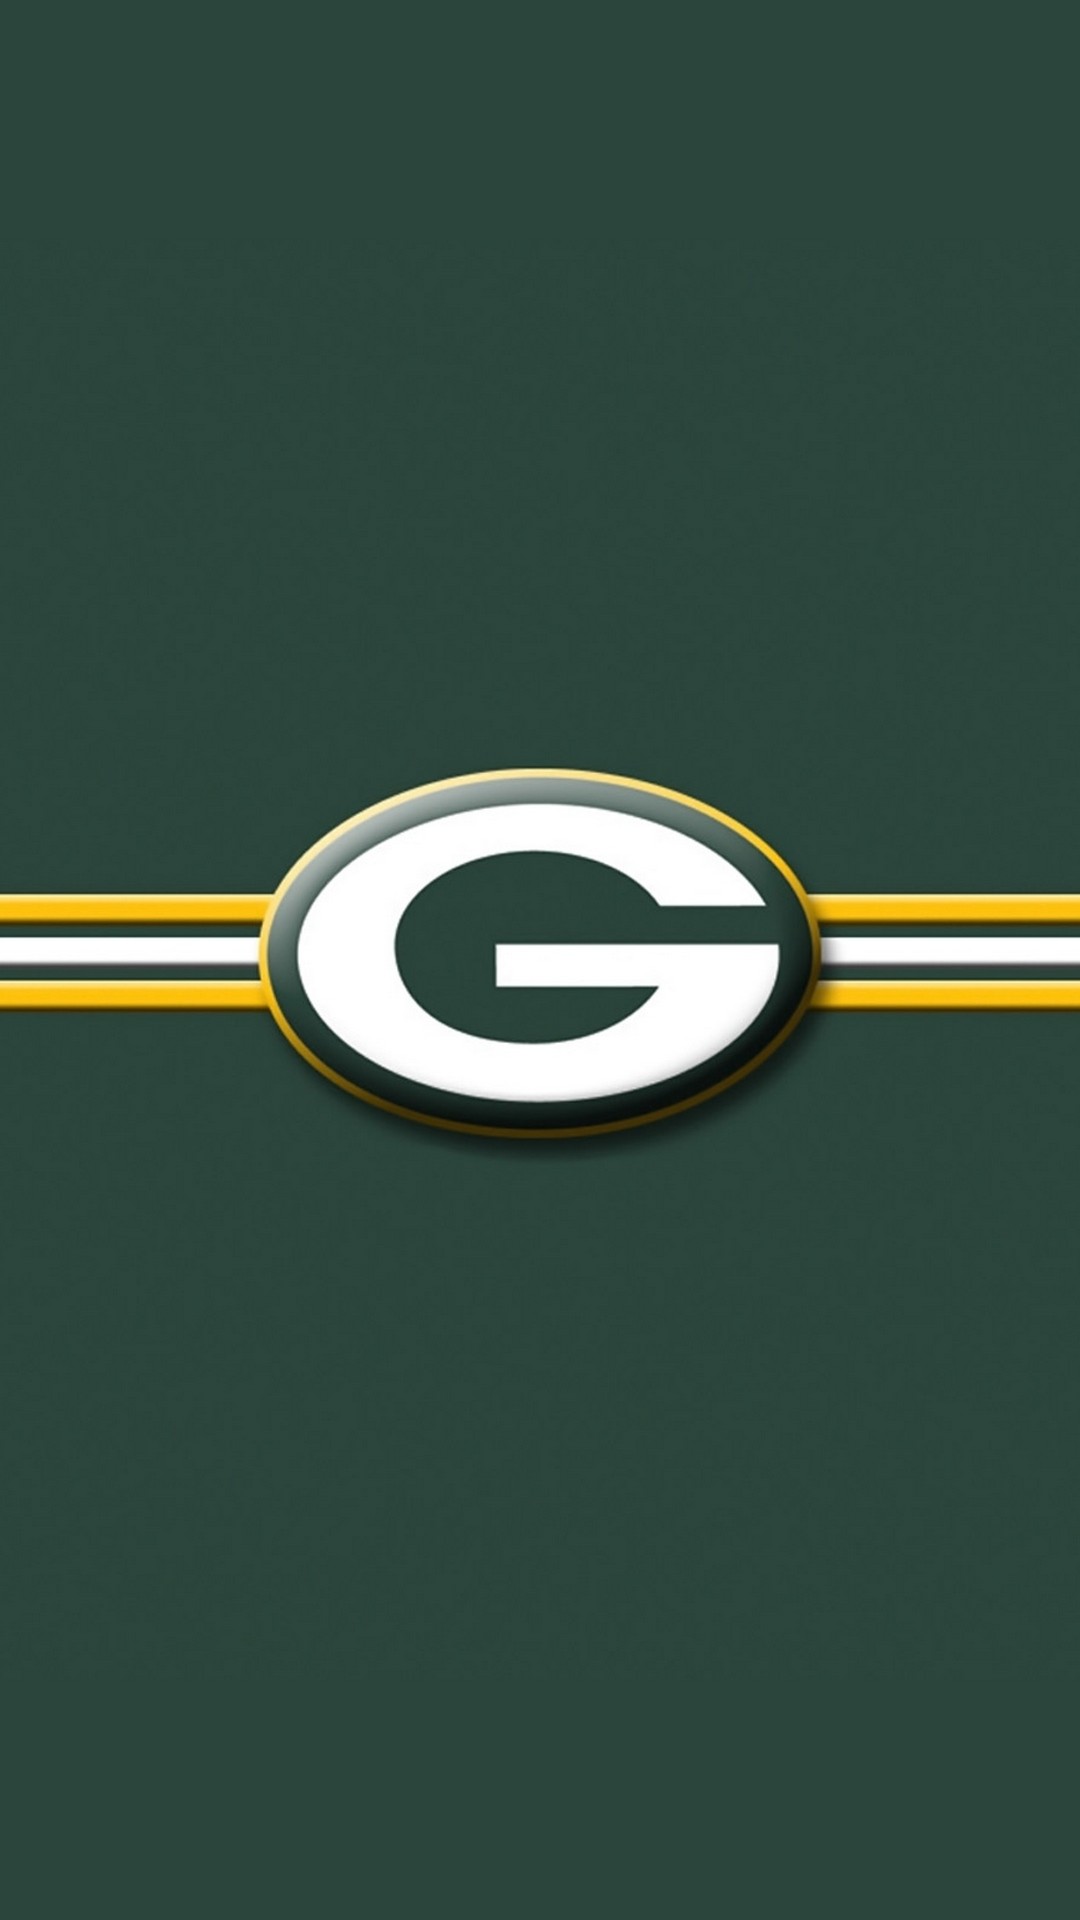 Green Bay Packers Logo iPhone Wallpaper Size With high-resolution 1080X1920 pixel. Donwload and set as wallpaper for your iPhone X, iPhone XS home screen backgrounds, XS Max, XR, iPhone8 lock screen wallpaper, iPhone 7, 6, SE, and other mobile devices